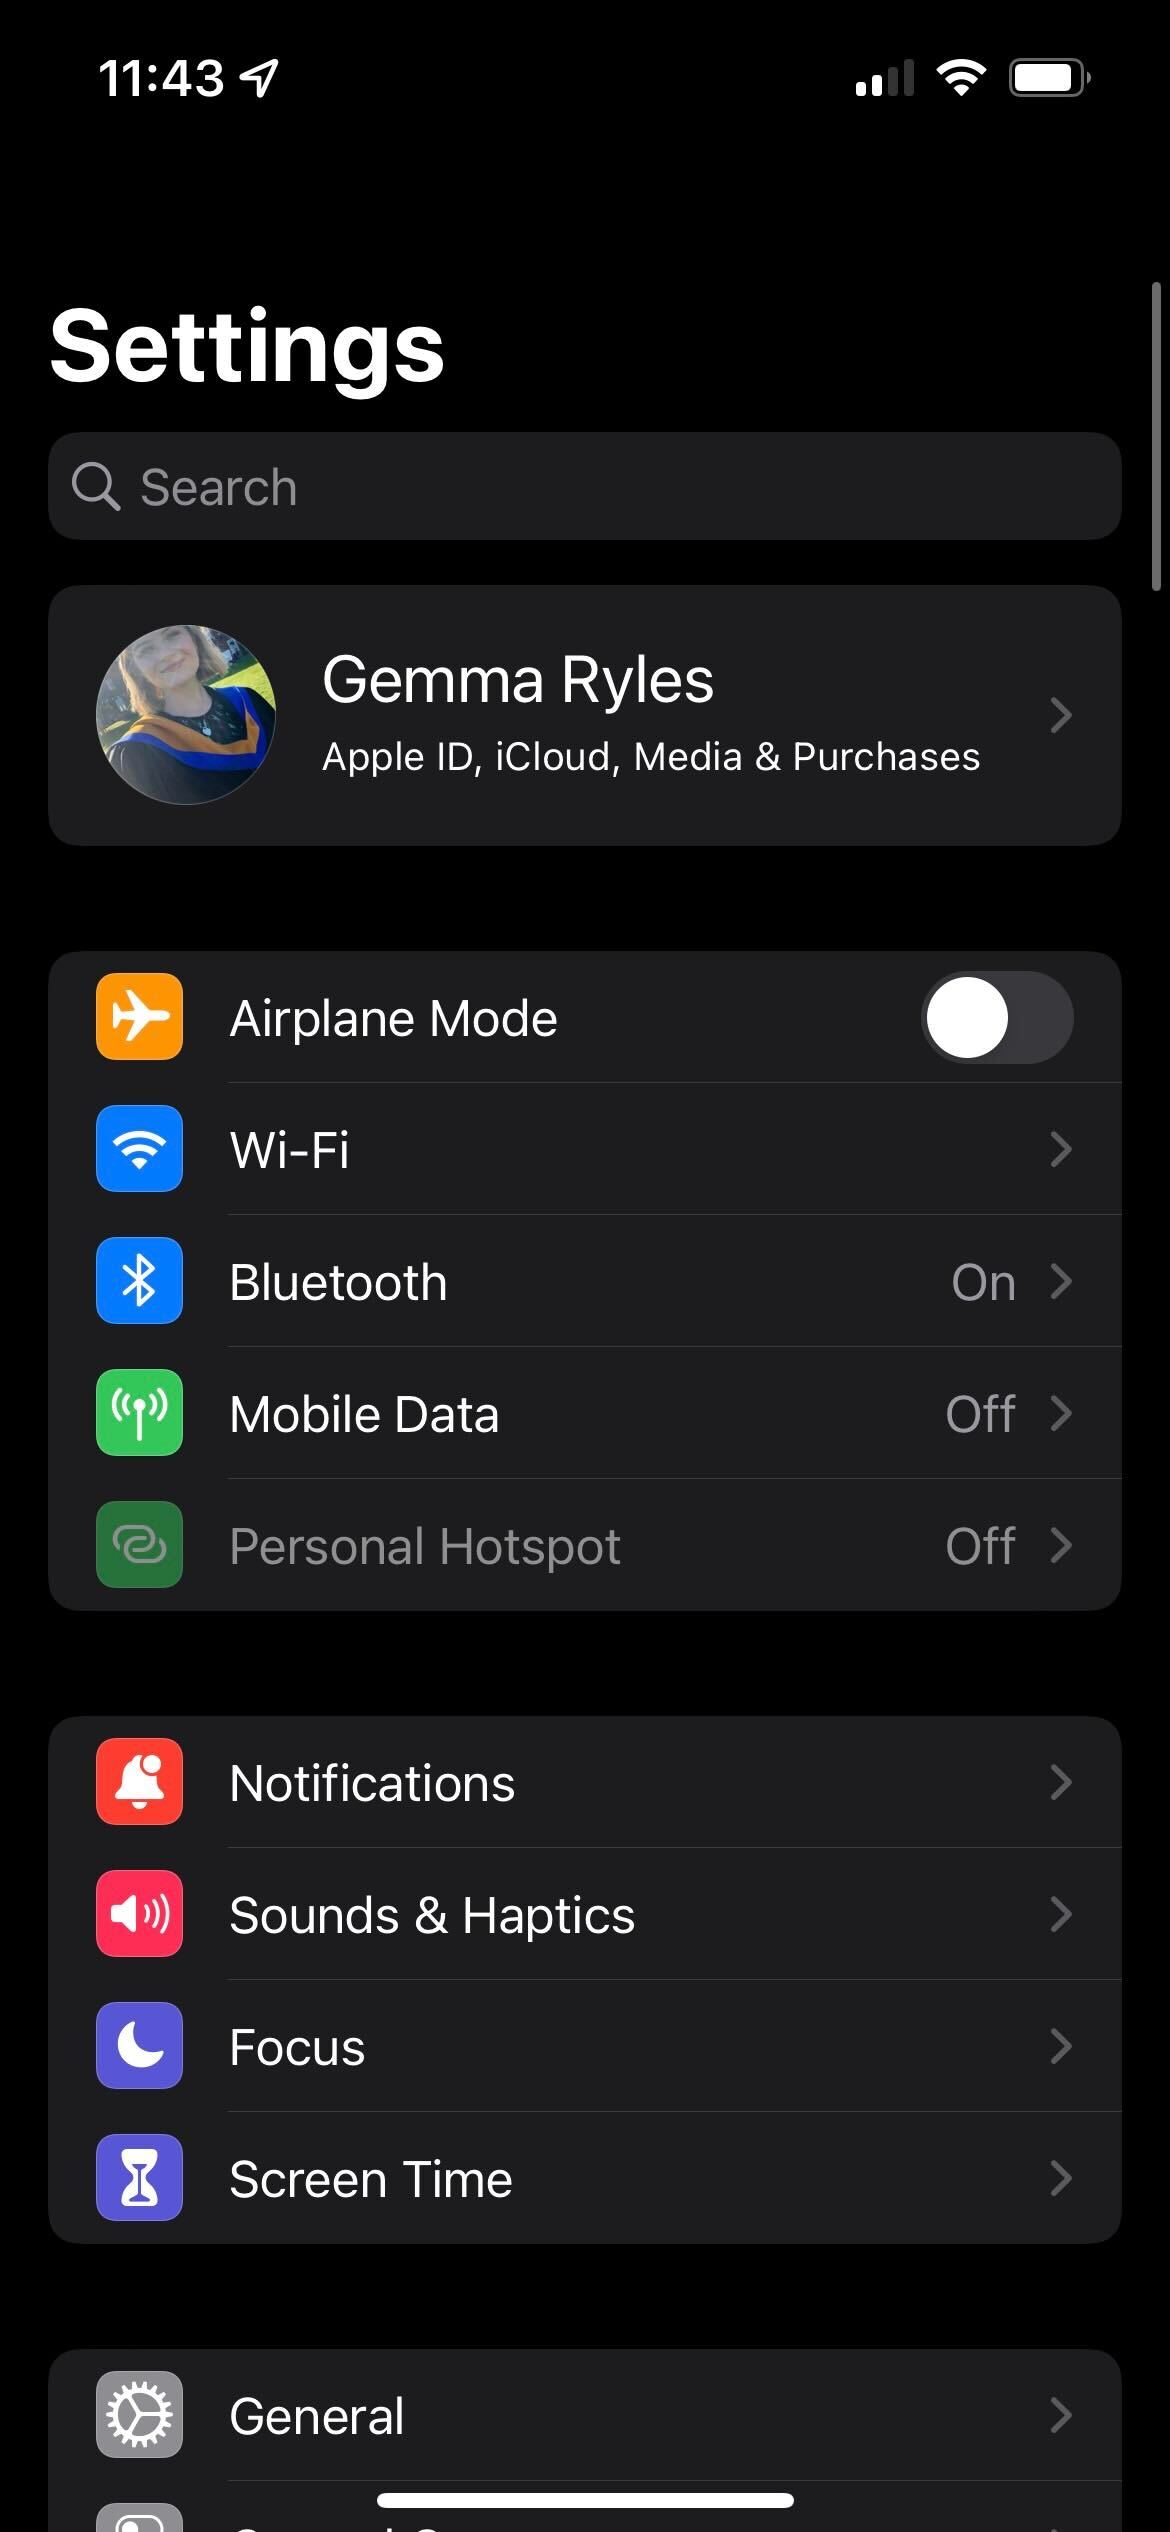 The Settings app in the iphone